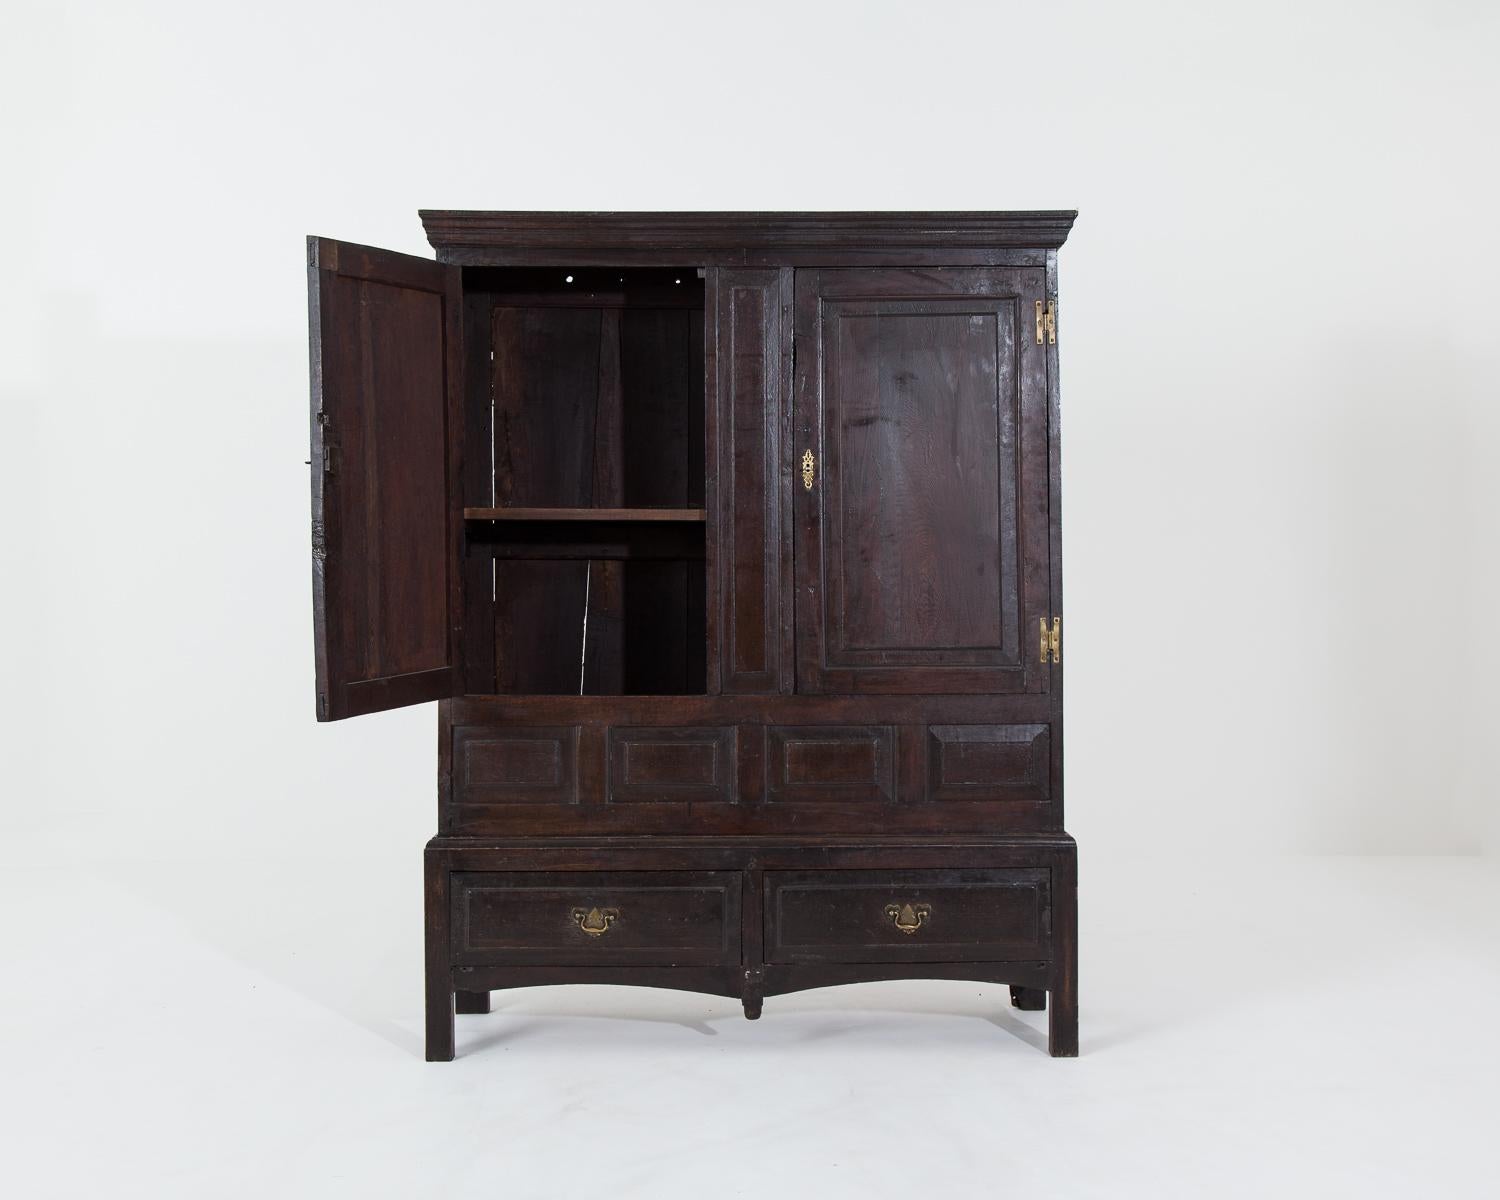 Substantial 18th century oak livery cupboard.

The piece includes some of the original pegs, probably once used for hanging tack and original hand painted wallpaper on the back of the cupboard. A modern shelf has been added at some point to make